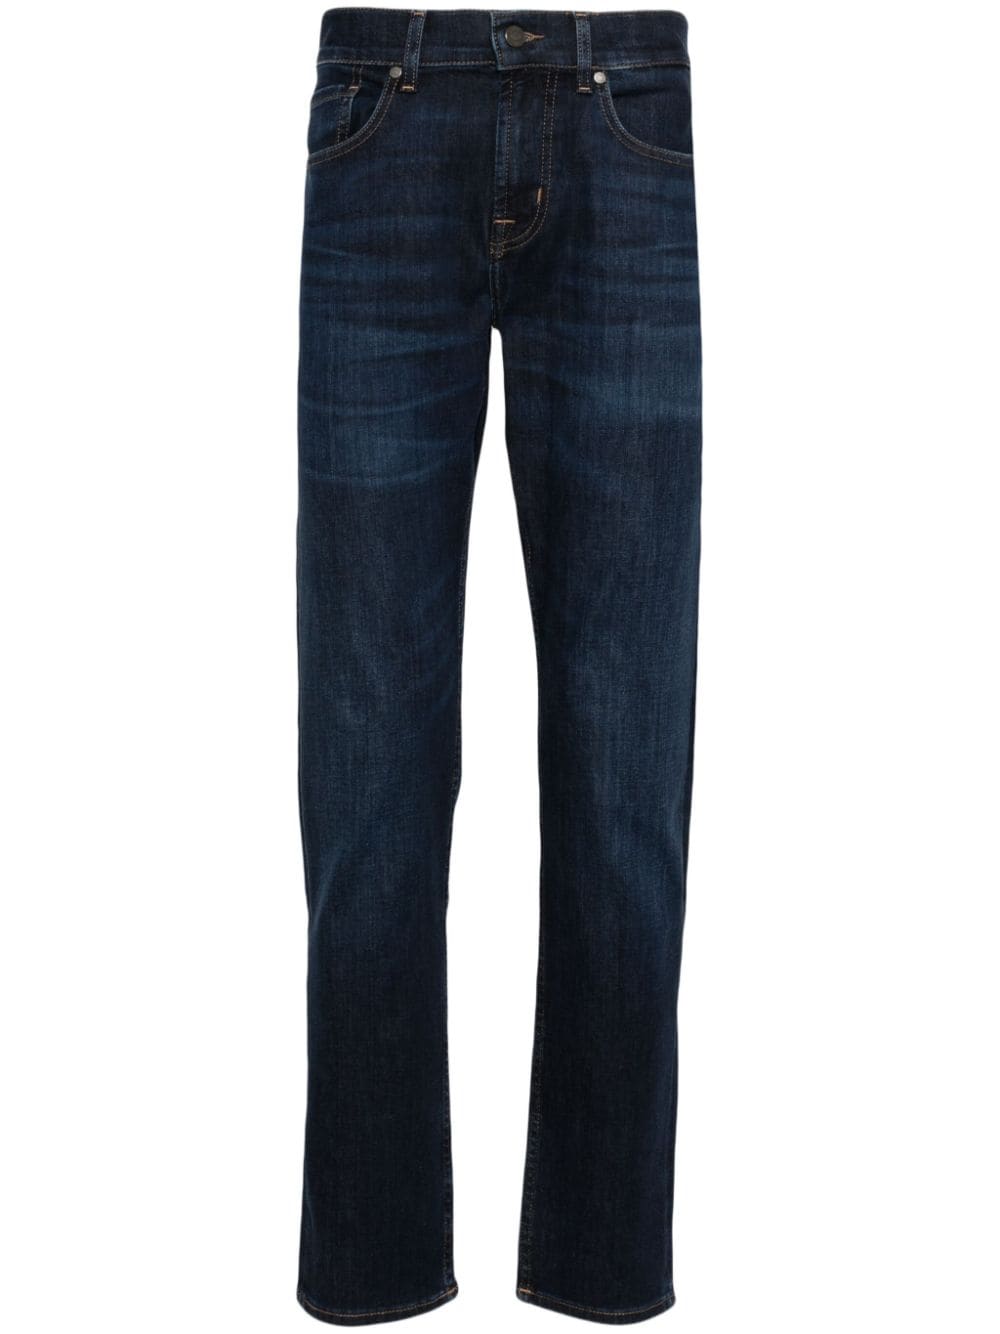 7 For All Mankind Slimmy straight jeans - Blue von 7 For All Mankind